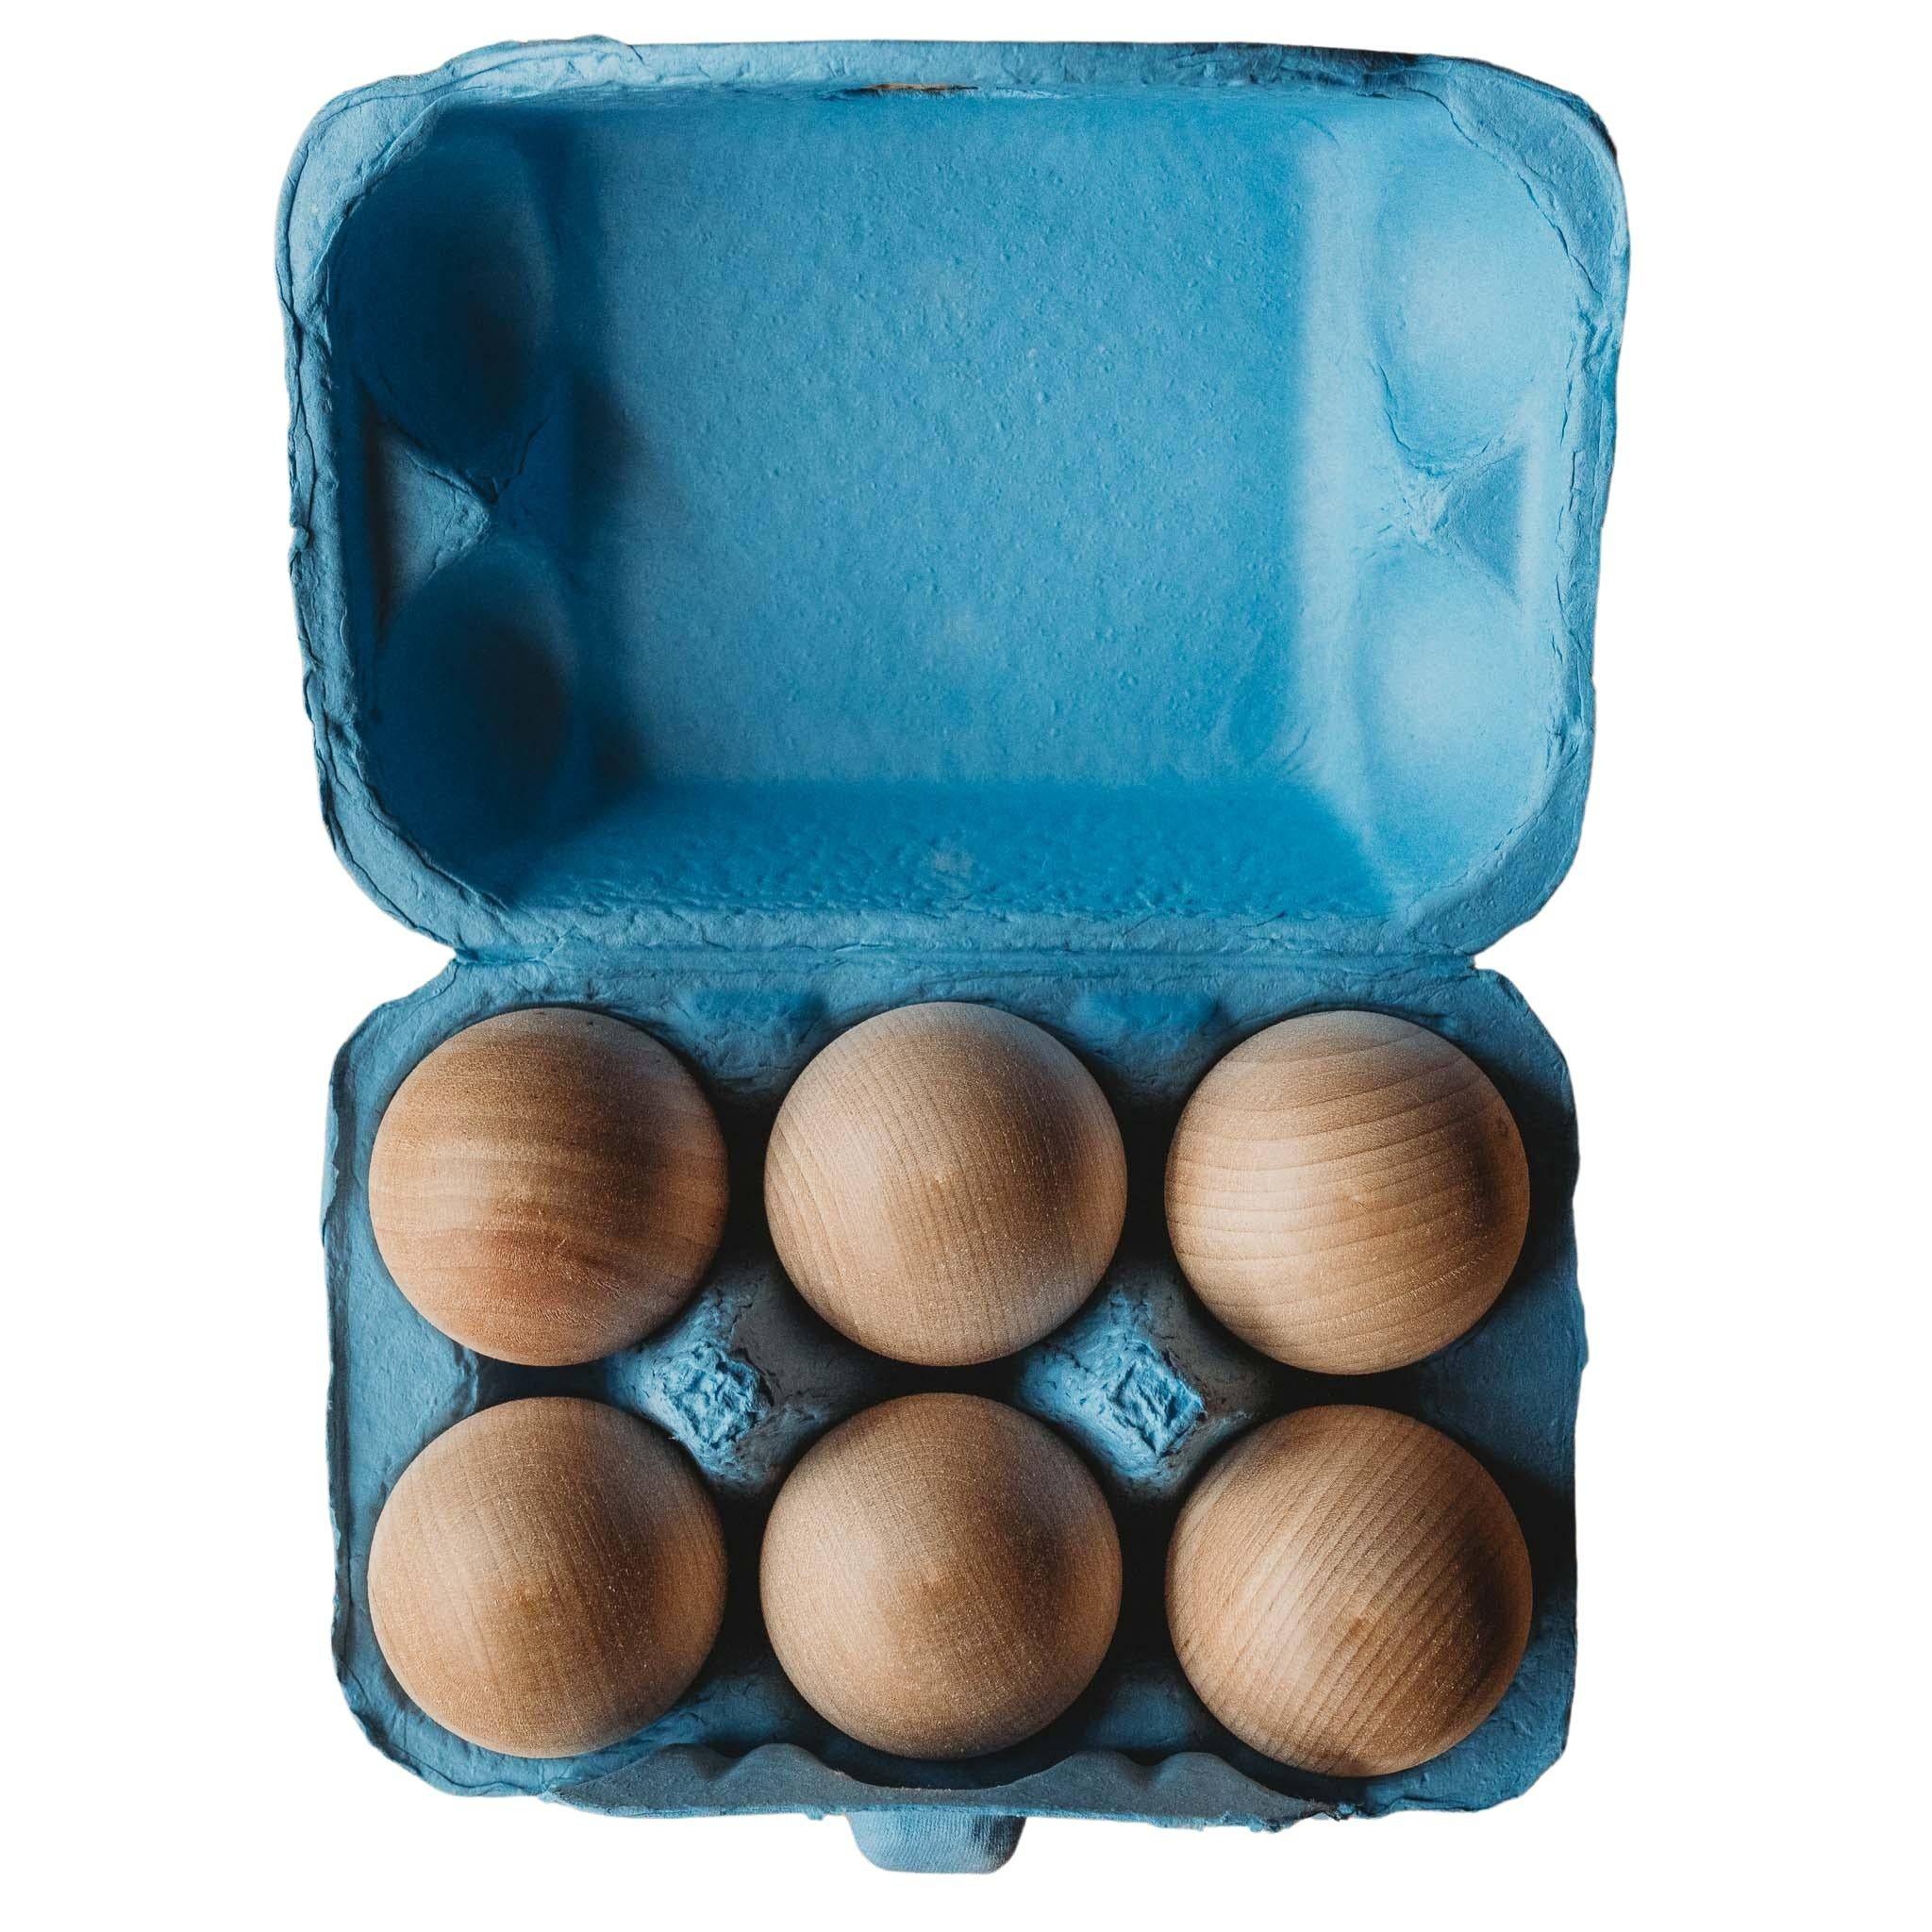 Stamping a tray of eggs 